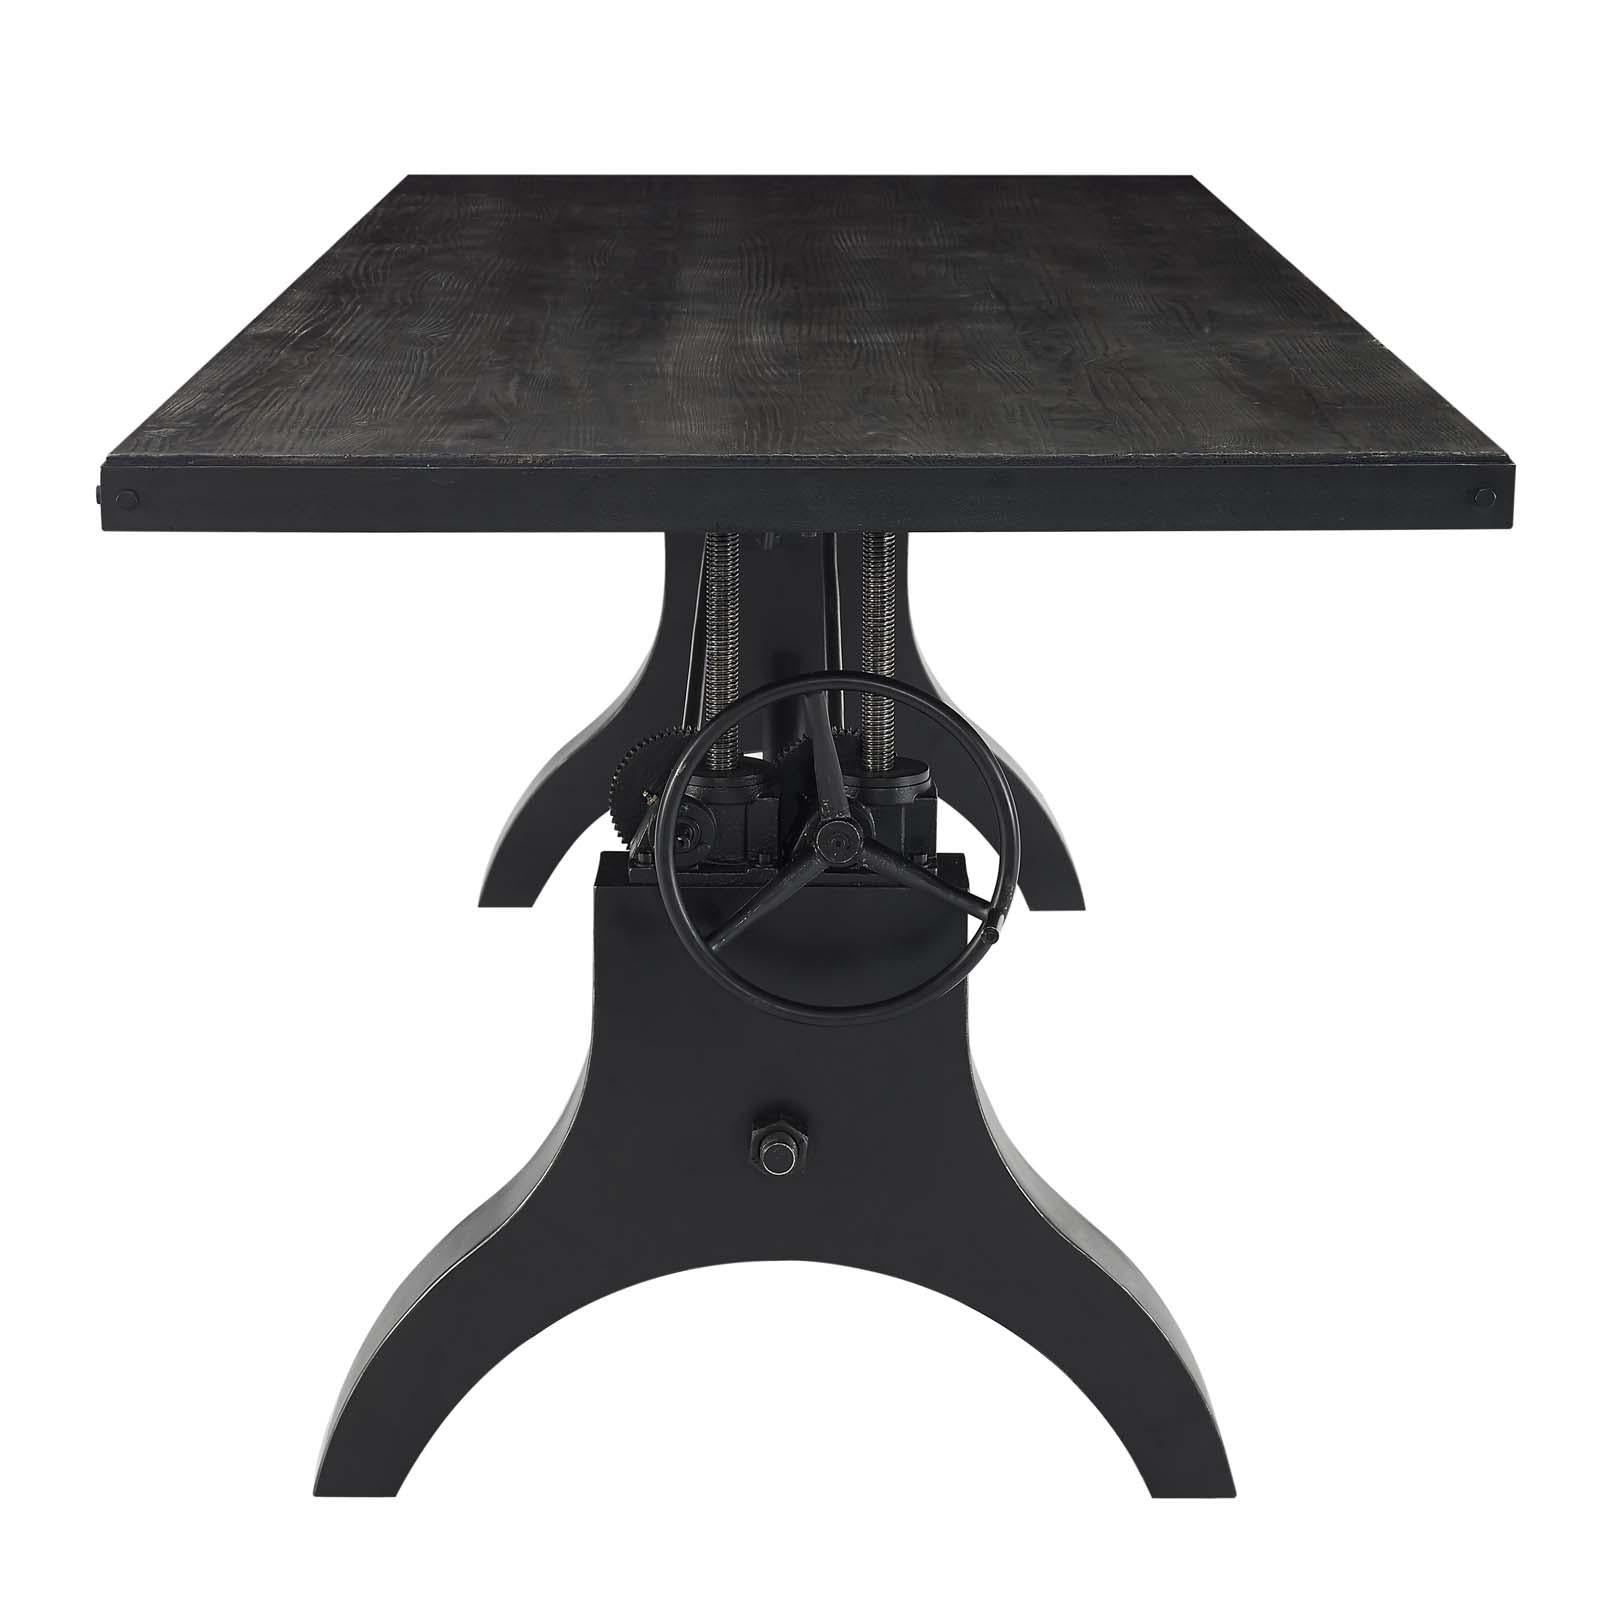 Modway Furniture Modern Genuine 96" Crank Height Adjustable Rectangle Dining and Conference Table - EEI-3147